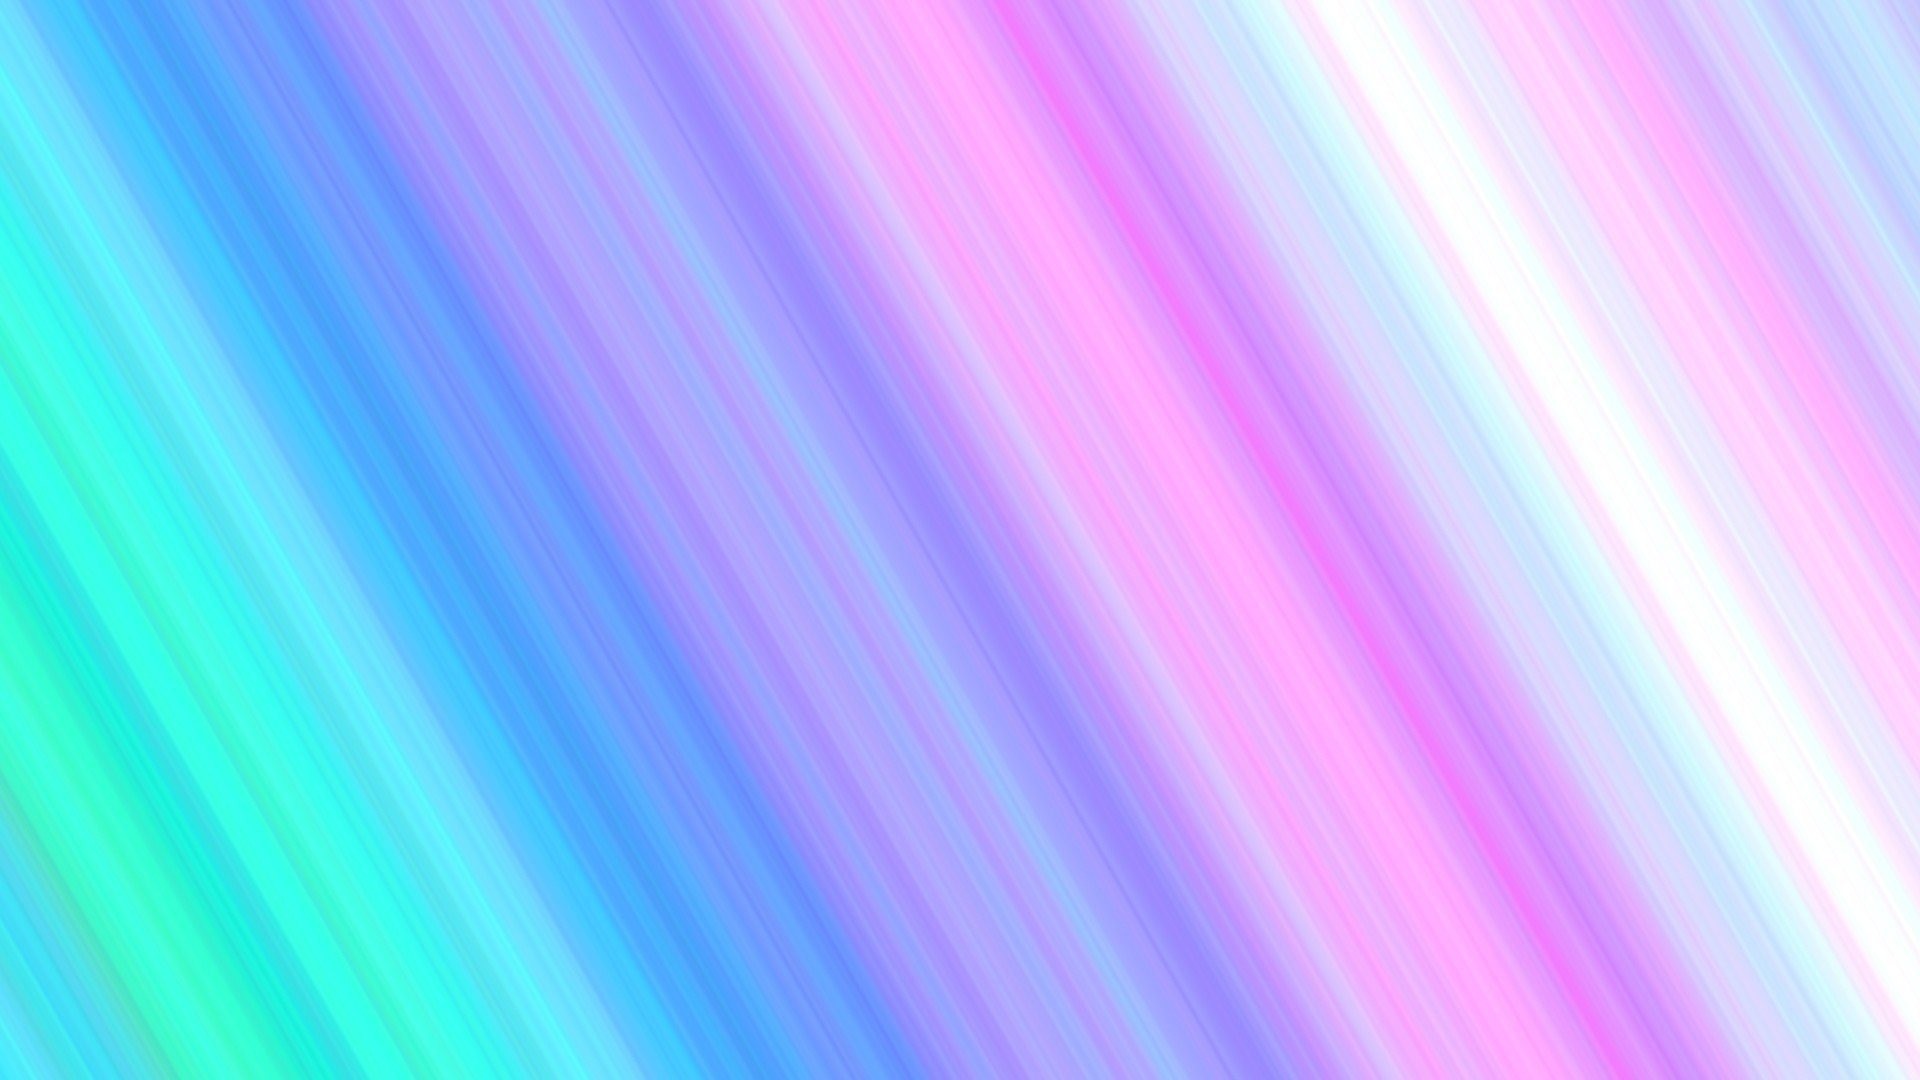 Pink Purple And Blue Wallpaper - Backgrounds 2048 Pixels Wide And 1152 Pixels Tall - HD Wallpaper 